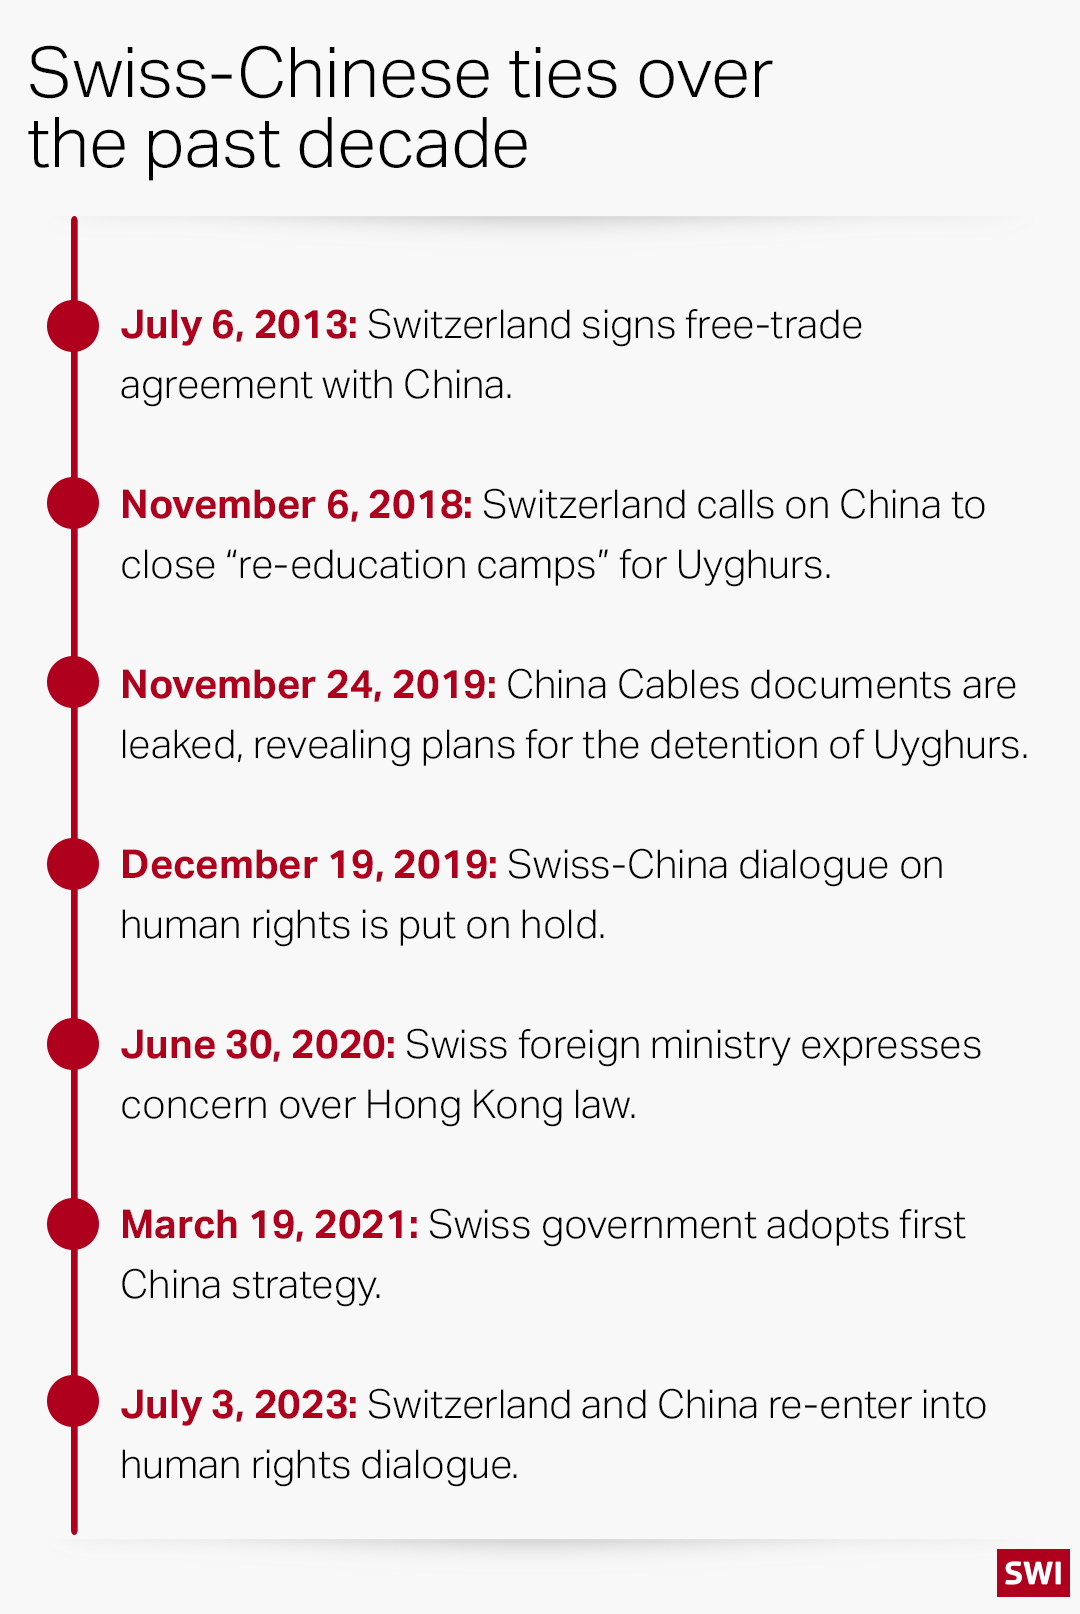 Timeline of Swiss-Chinese relationships in the last decade